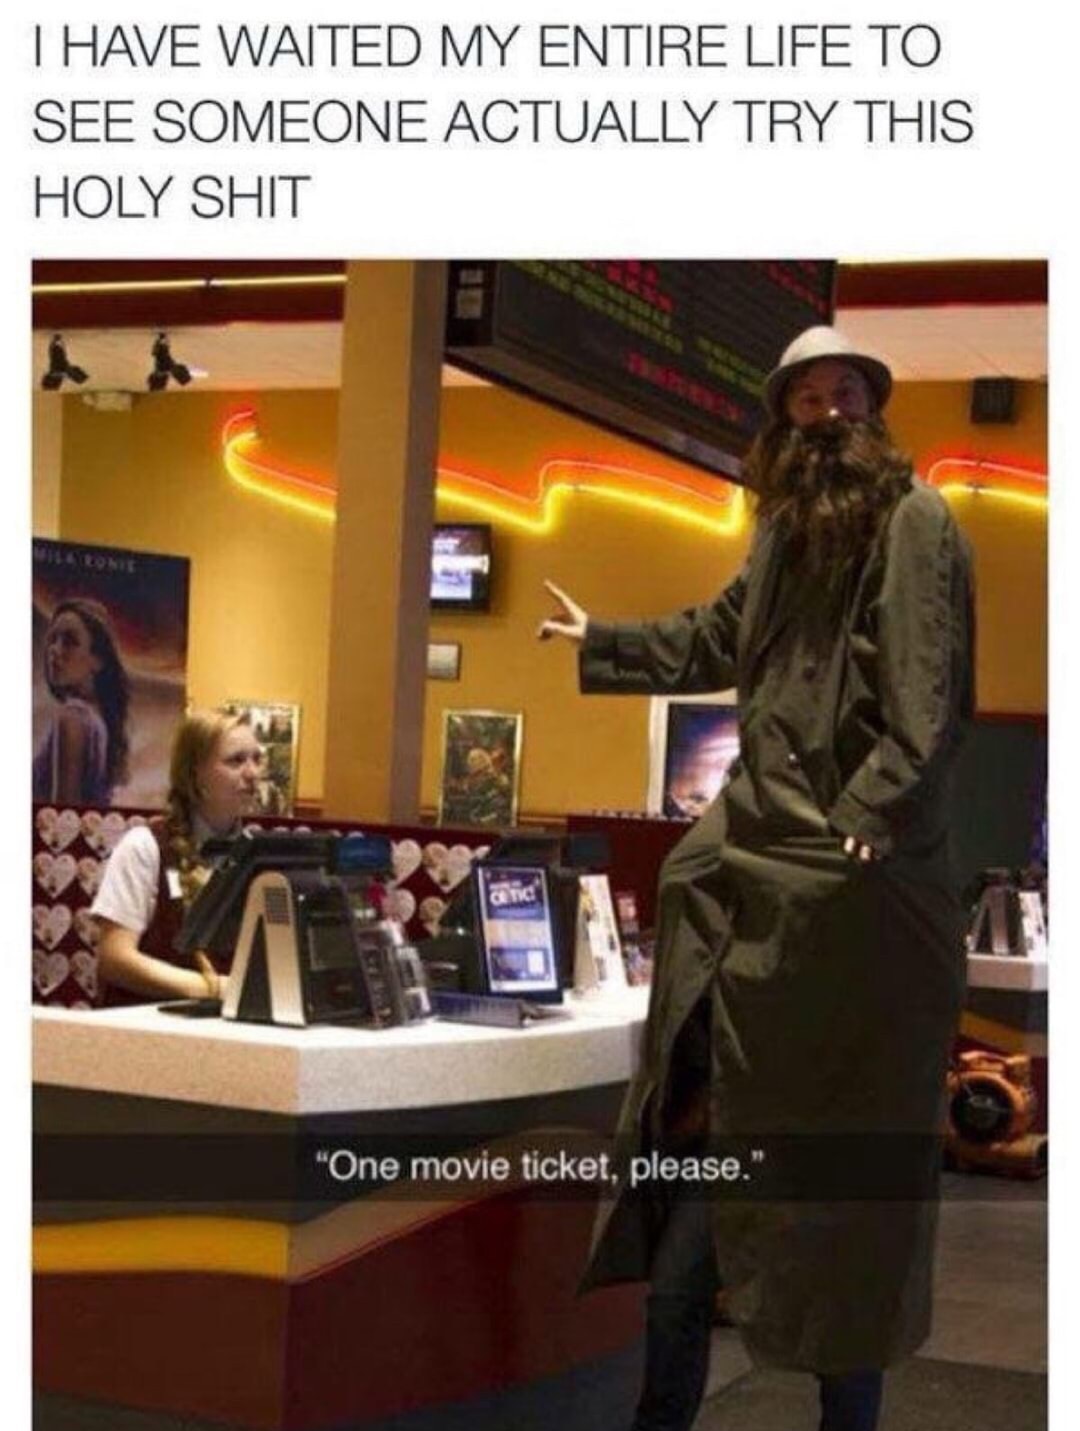 two kids in a trench coat - I Have Waited My Entire Life To See Someone Actually Try This Holy Shit "One movie ticket, please."